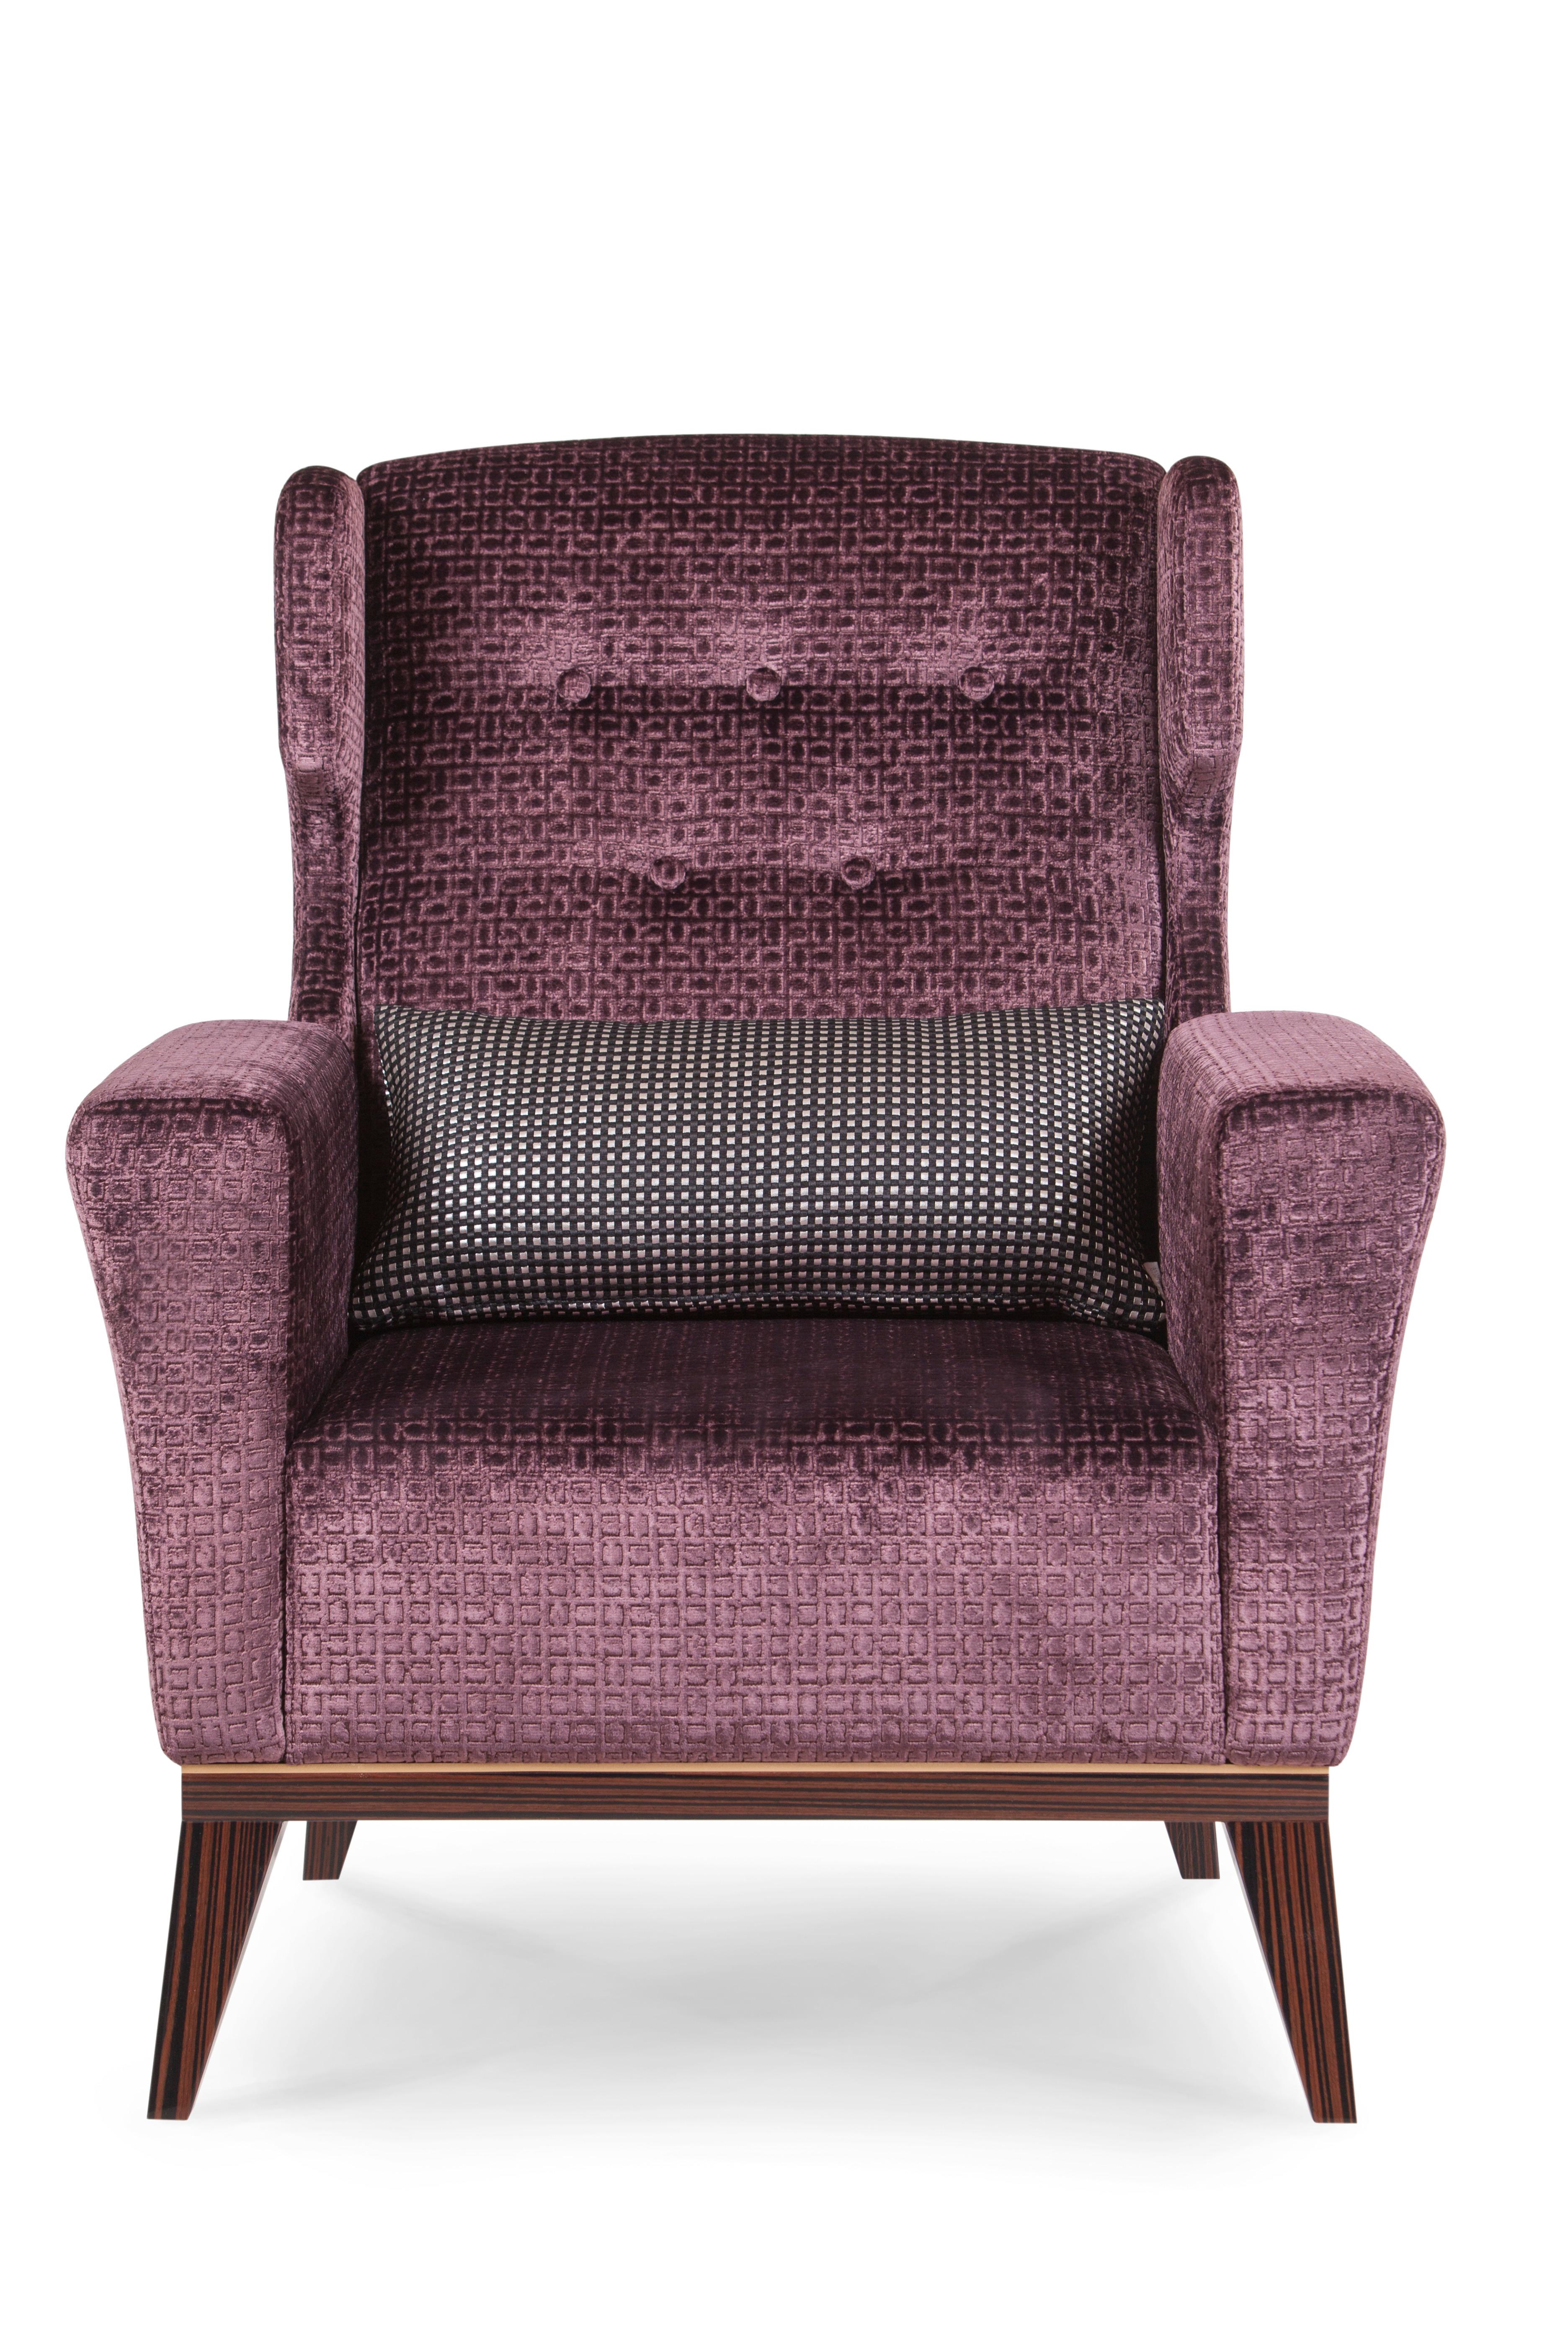 Genebra armchair, Modern Collection, Handcrafted in Portugal - Europe by GF Modern.

The Genebra armchair is designed to give your living room a sophisticated vintage look. The armchair is upholstered in aubergine velvet and lacquered with